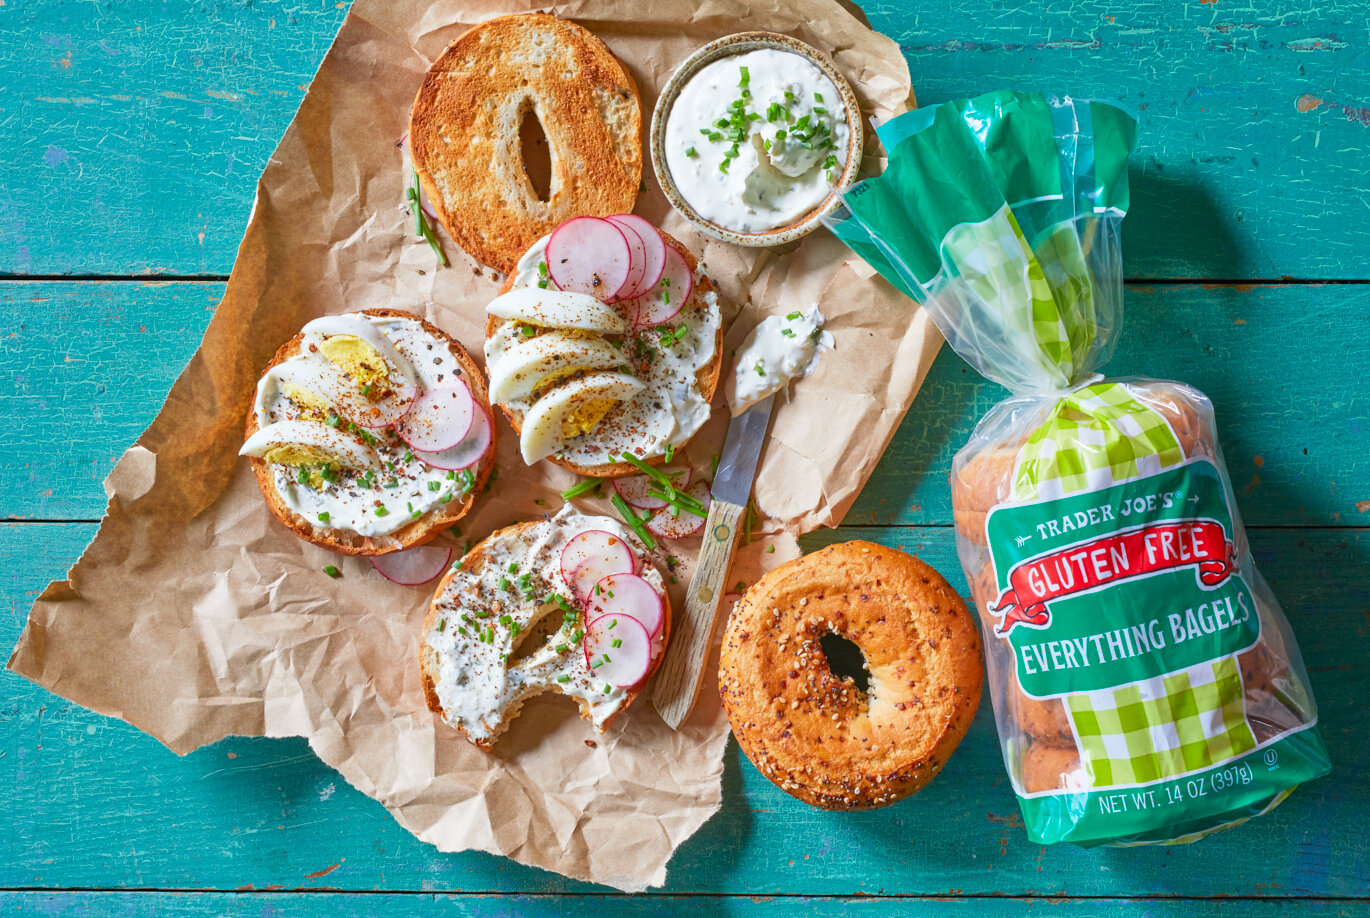 Trader Joe's Gluten Free Everything Bagels; toasted and spread with Chive & Onion Cream Cheese, and garnished with egg, radish and chives